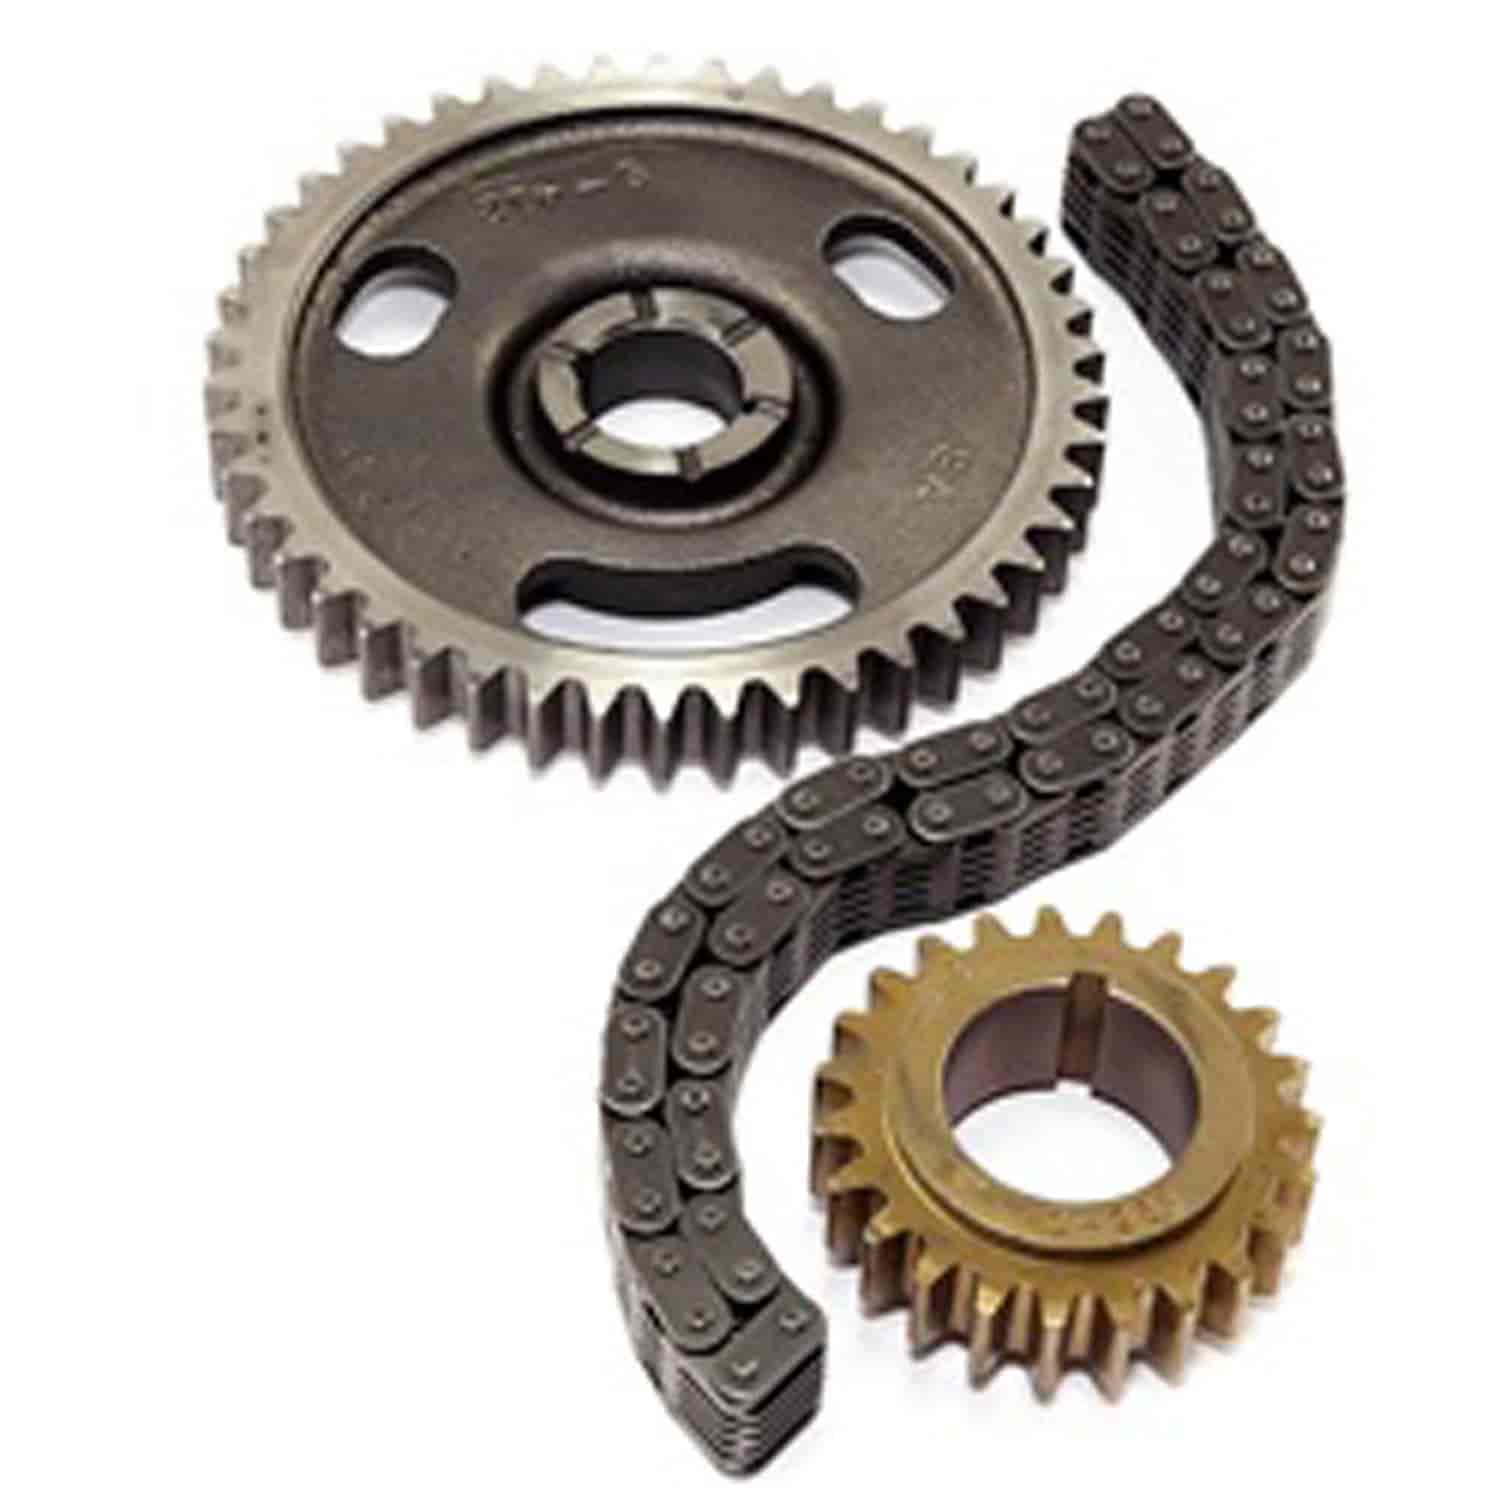 Timing Chain Kit for Select 1966-1991 AMC/Jeep Models with 290, 304, 343, 360, 390 or 401 Engines